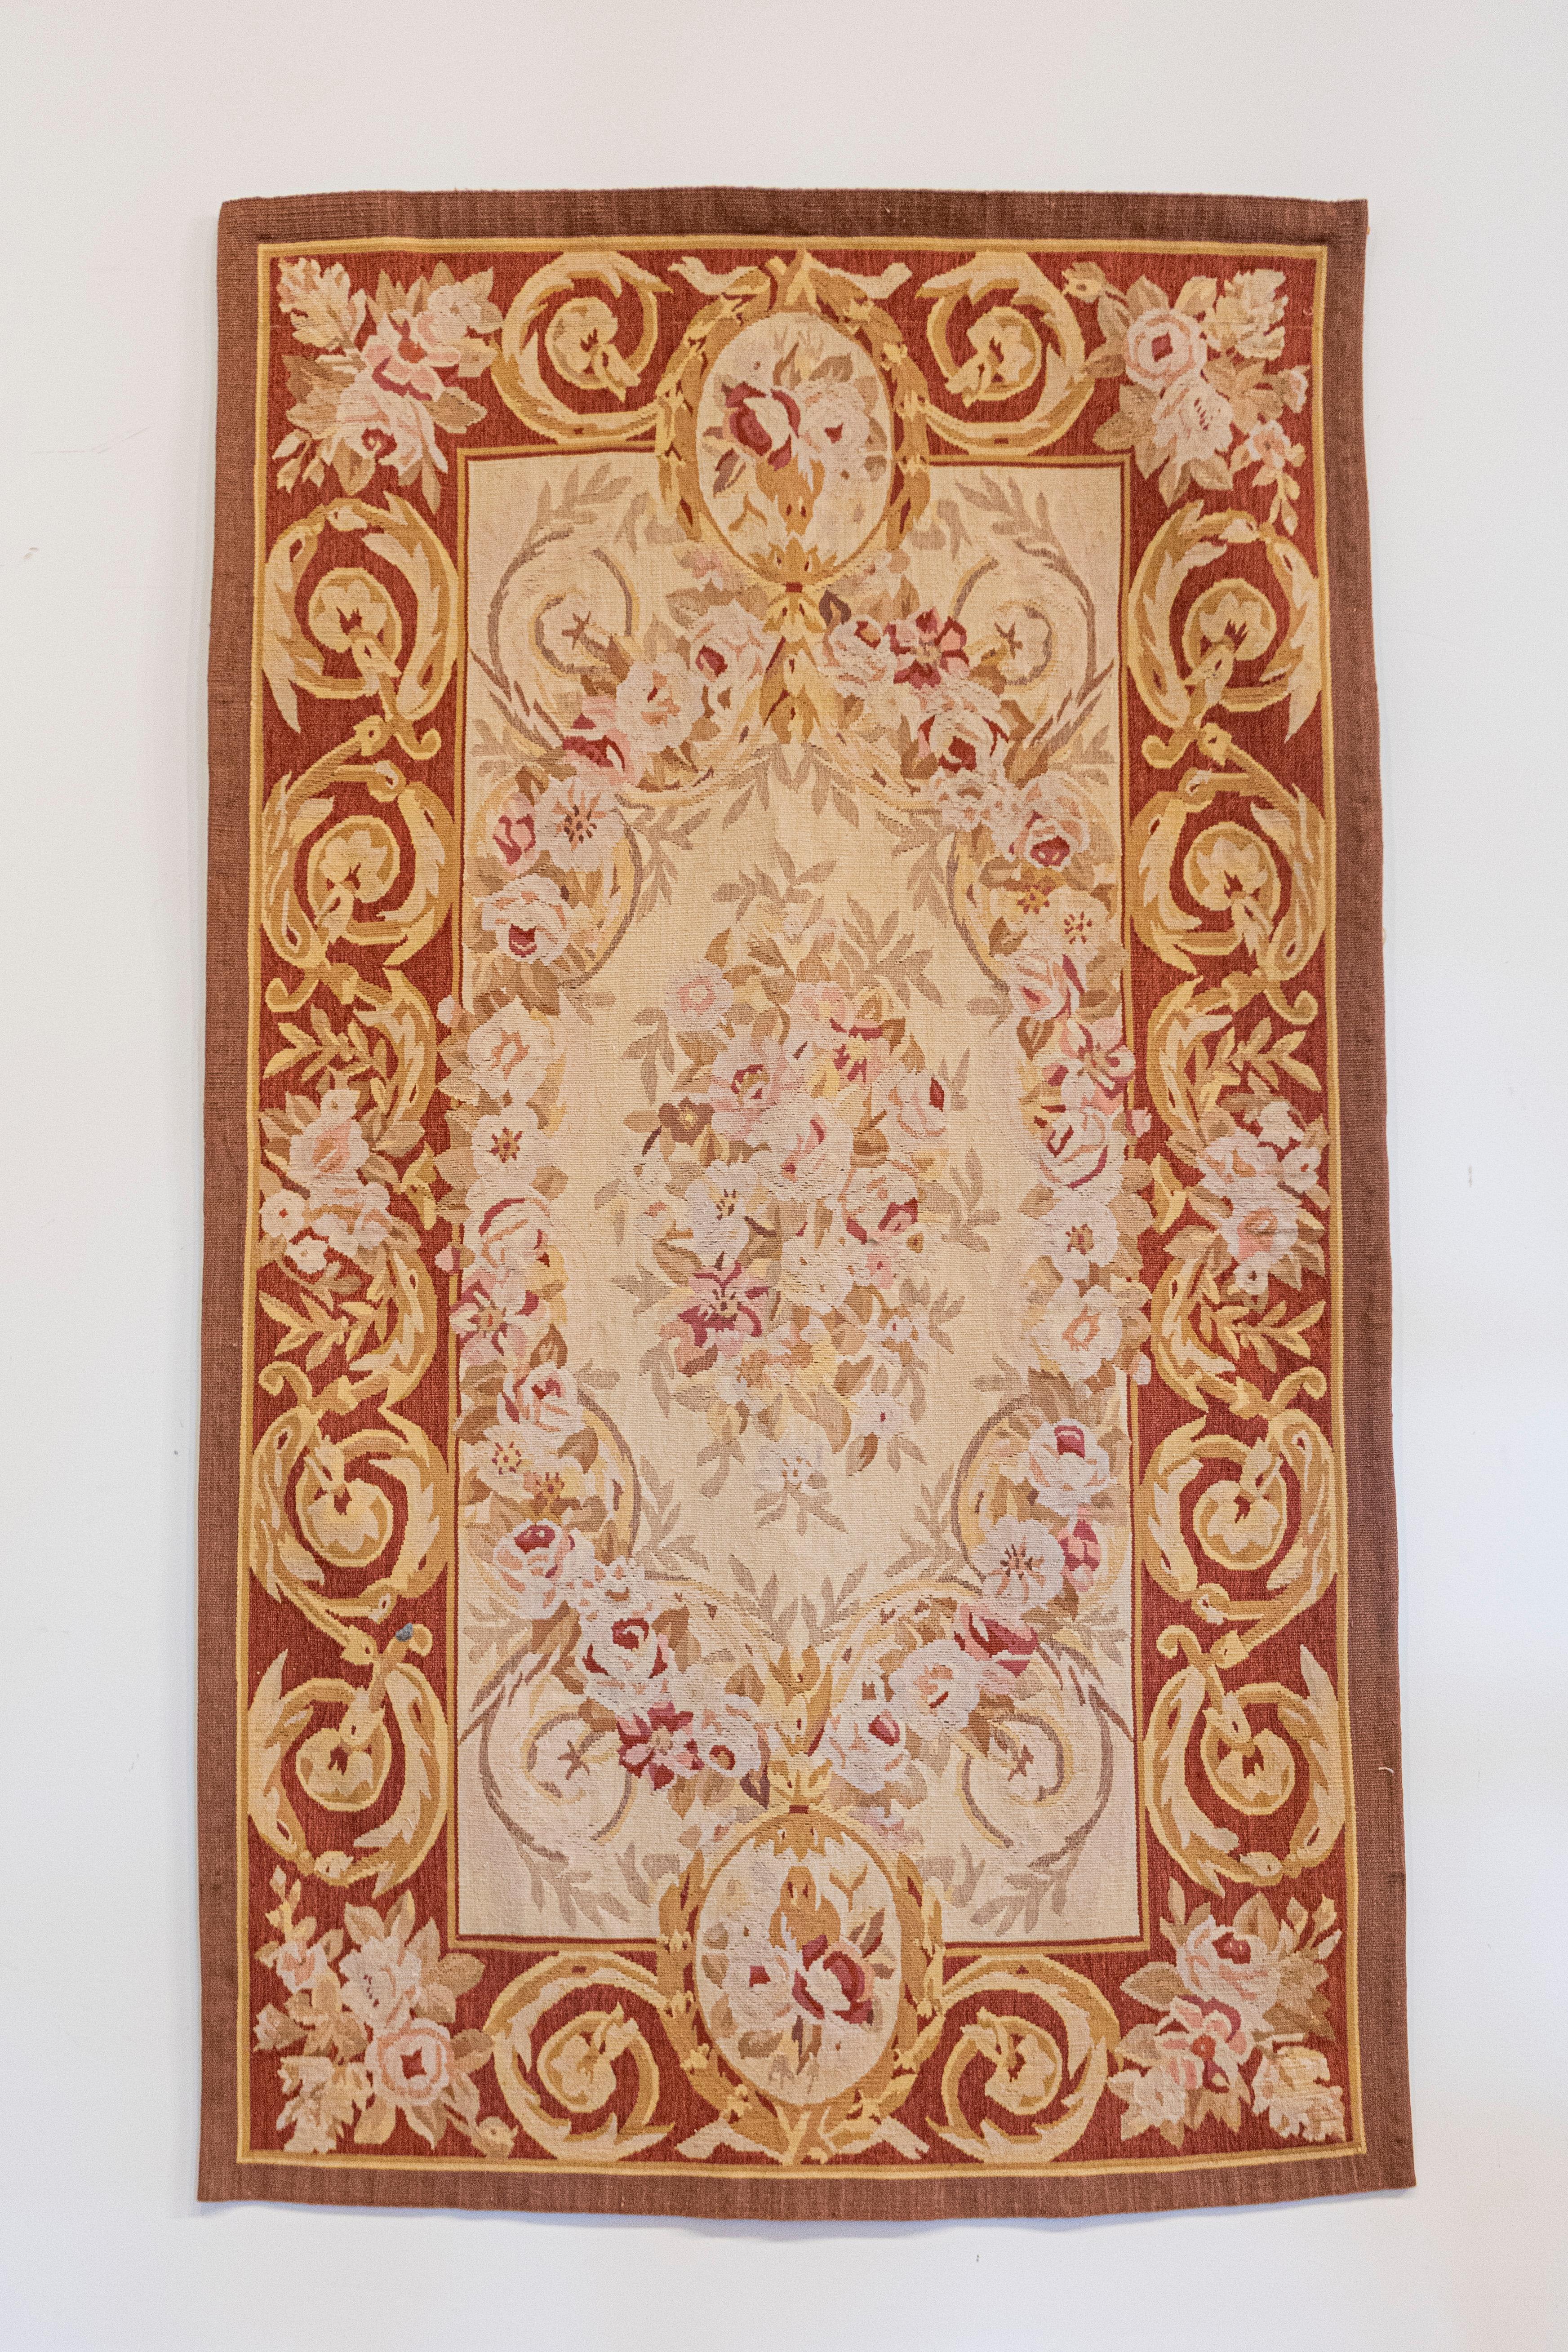 A pair of French Napoleon III period Aubusson tapestries from the mid-19th century depicting rinceaux surrounding a floral decor. Woven in the famous Aubusson Manufacture located in central France during the 1850s, each of this pair of wall